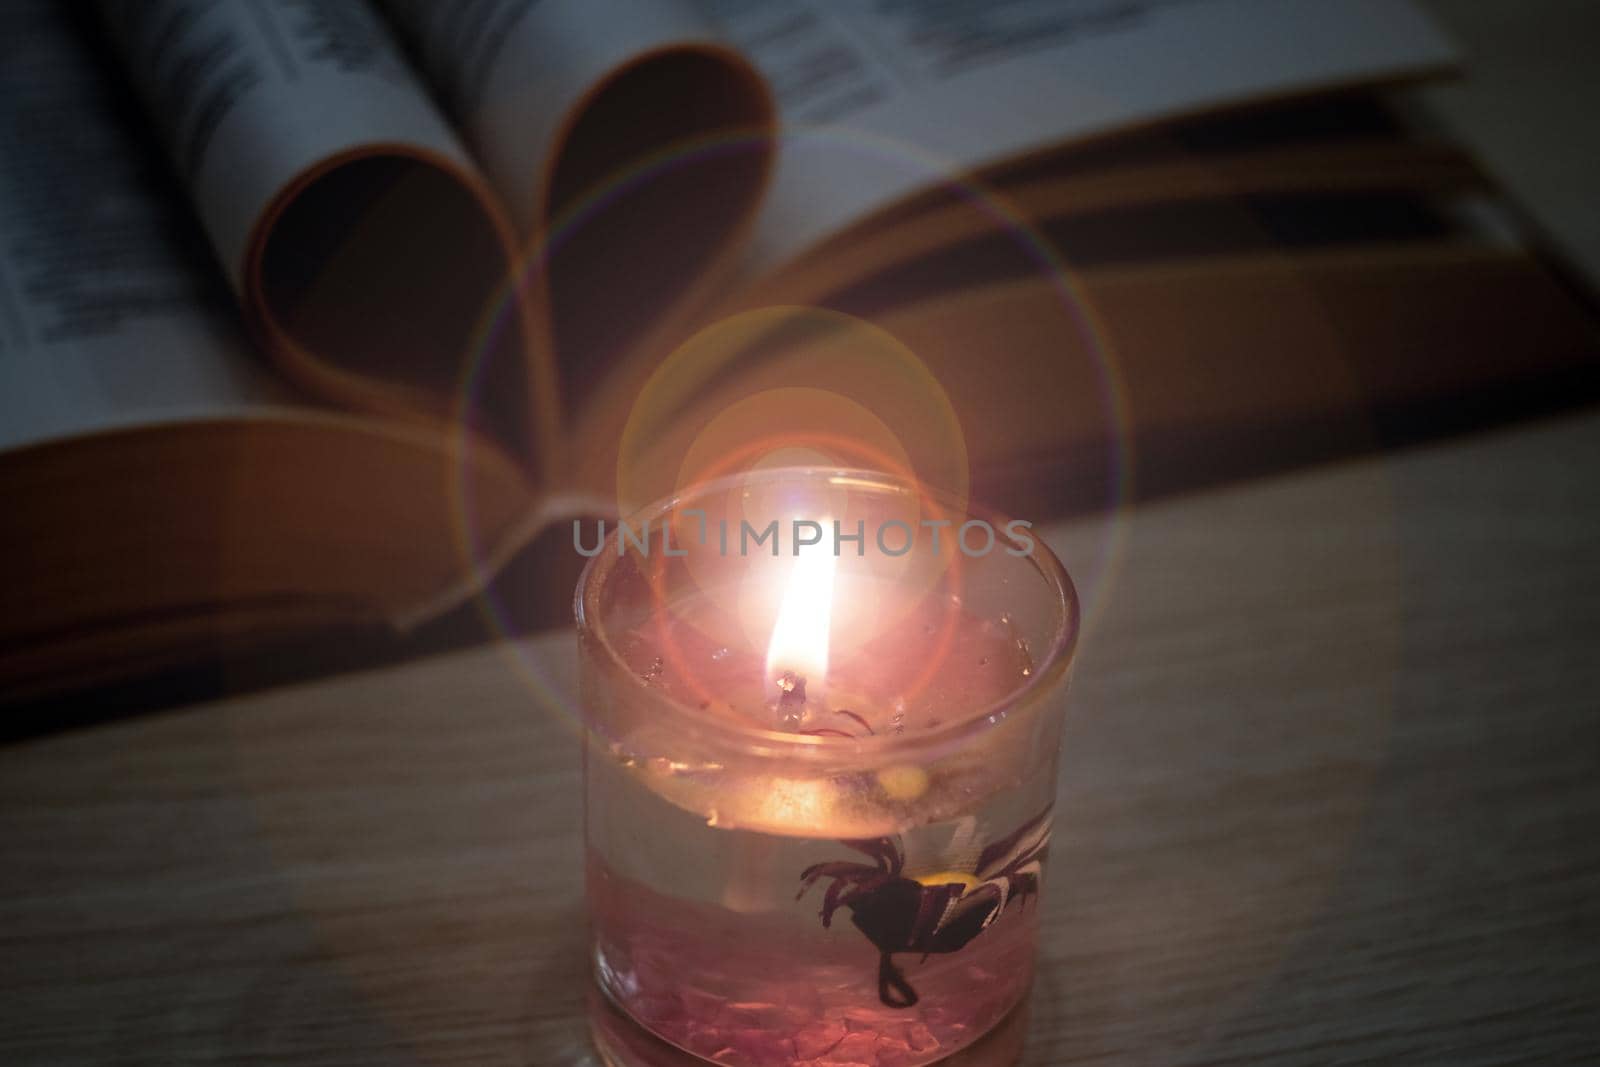 Bright candle in the dark against the background of the book close up